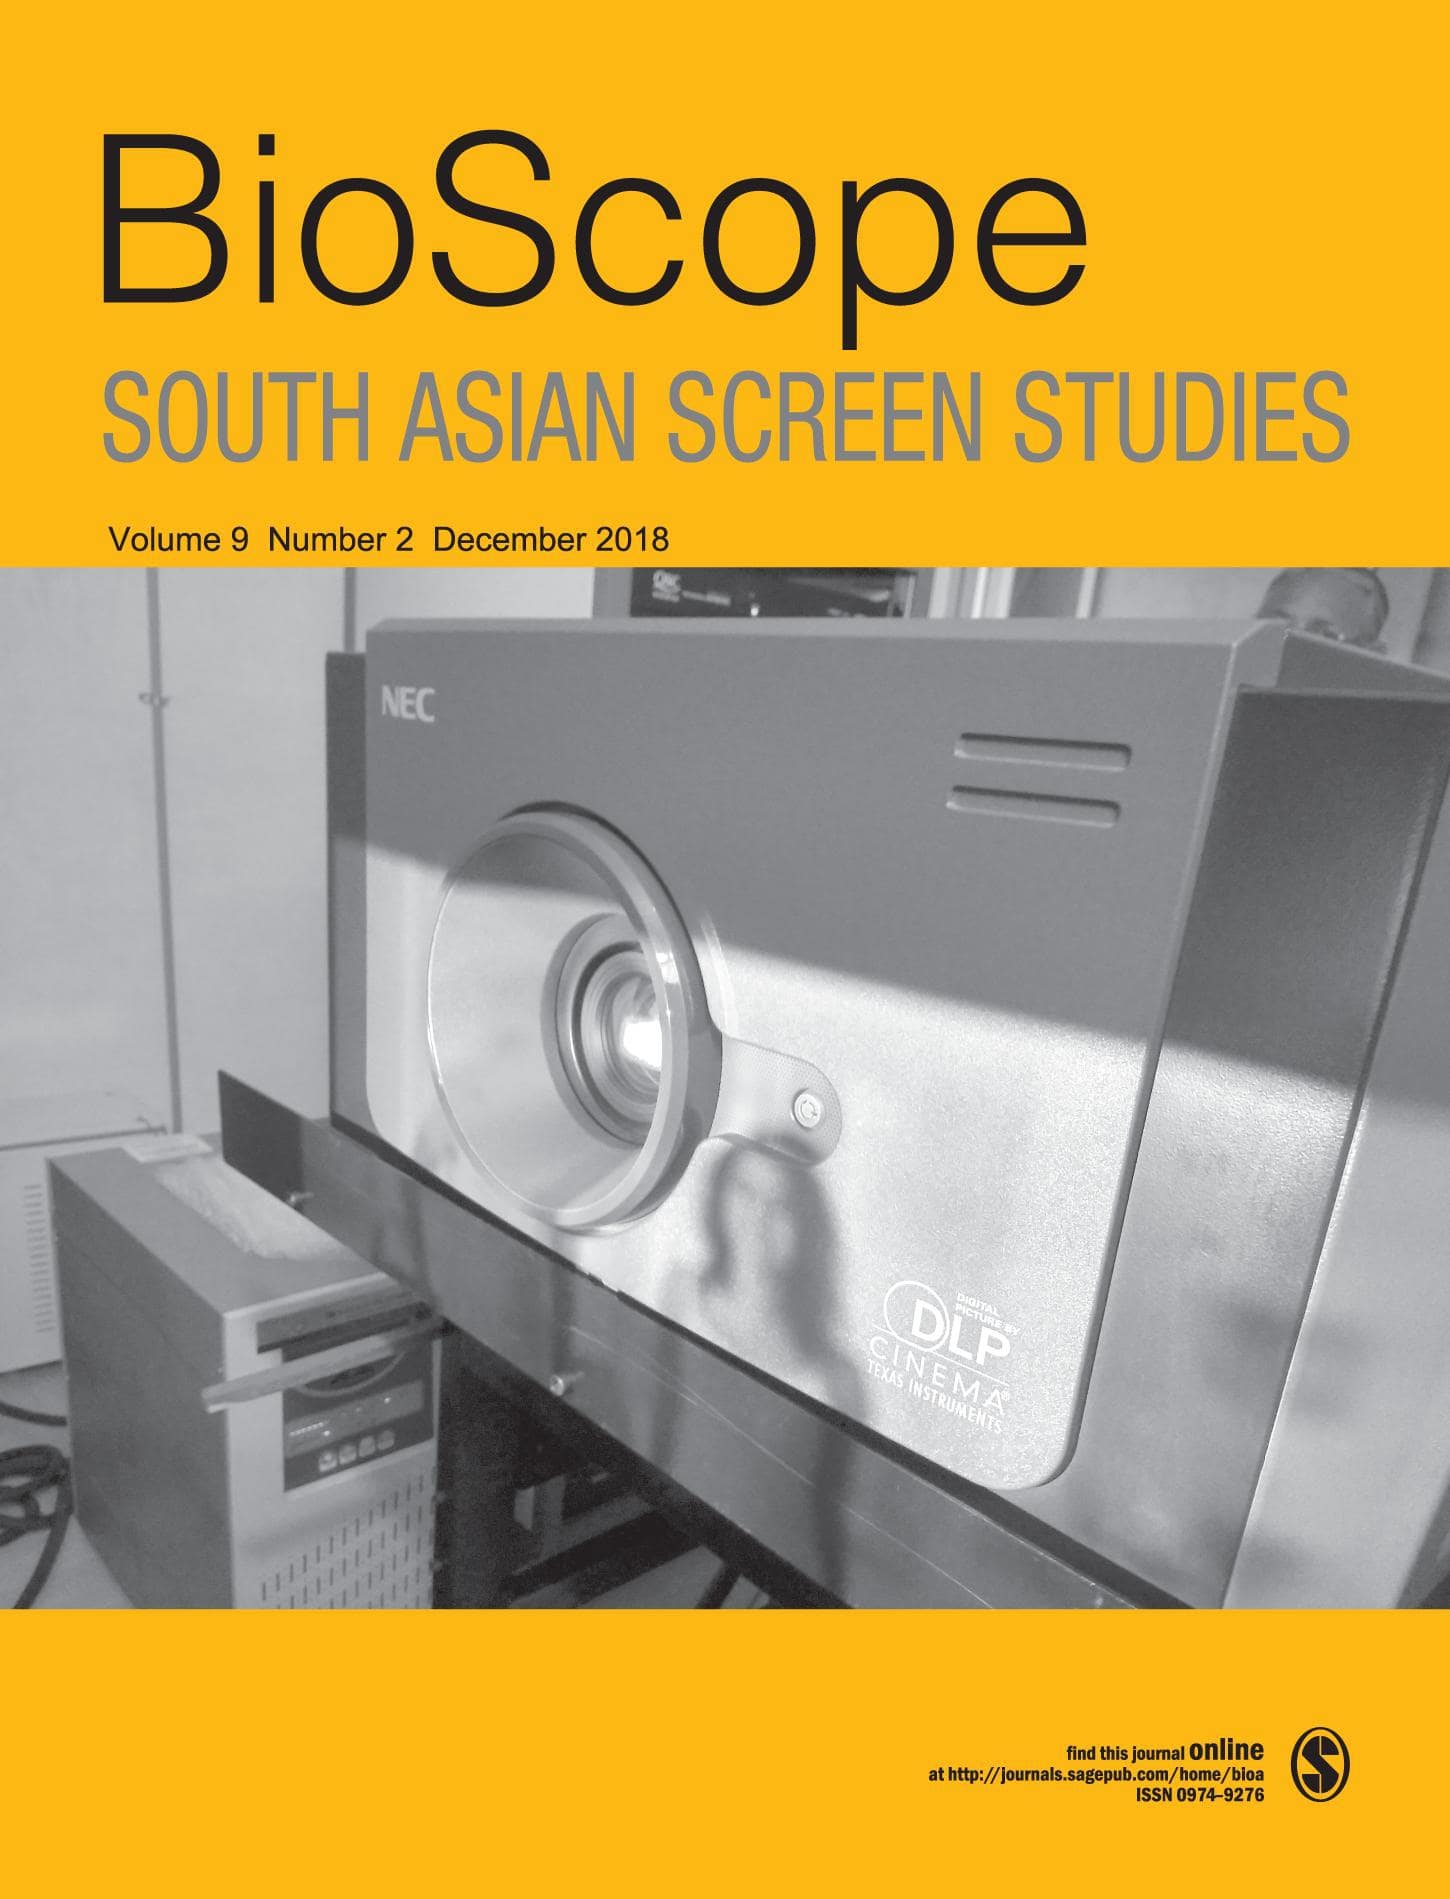 BioScope Volume 9 Issue 2, December 2018 - s a r a i